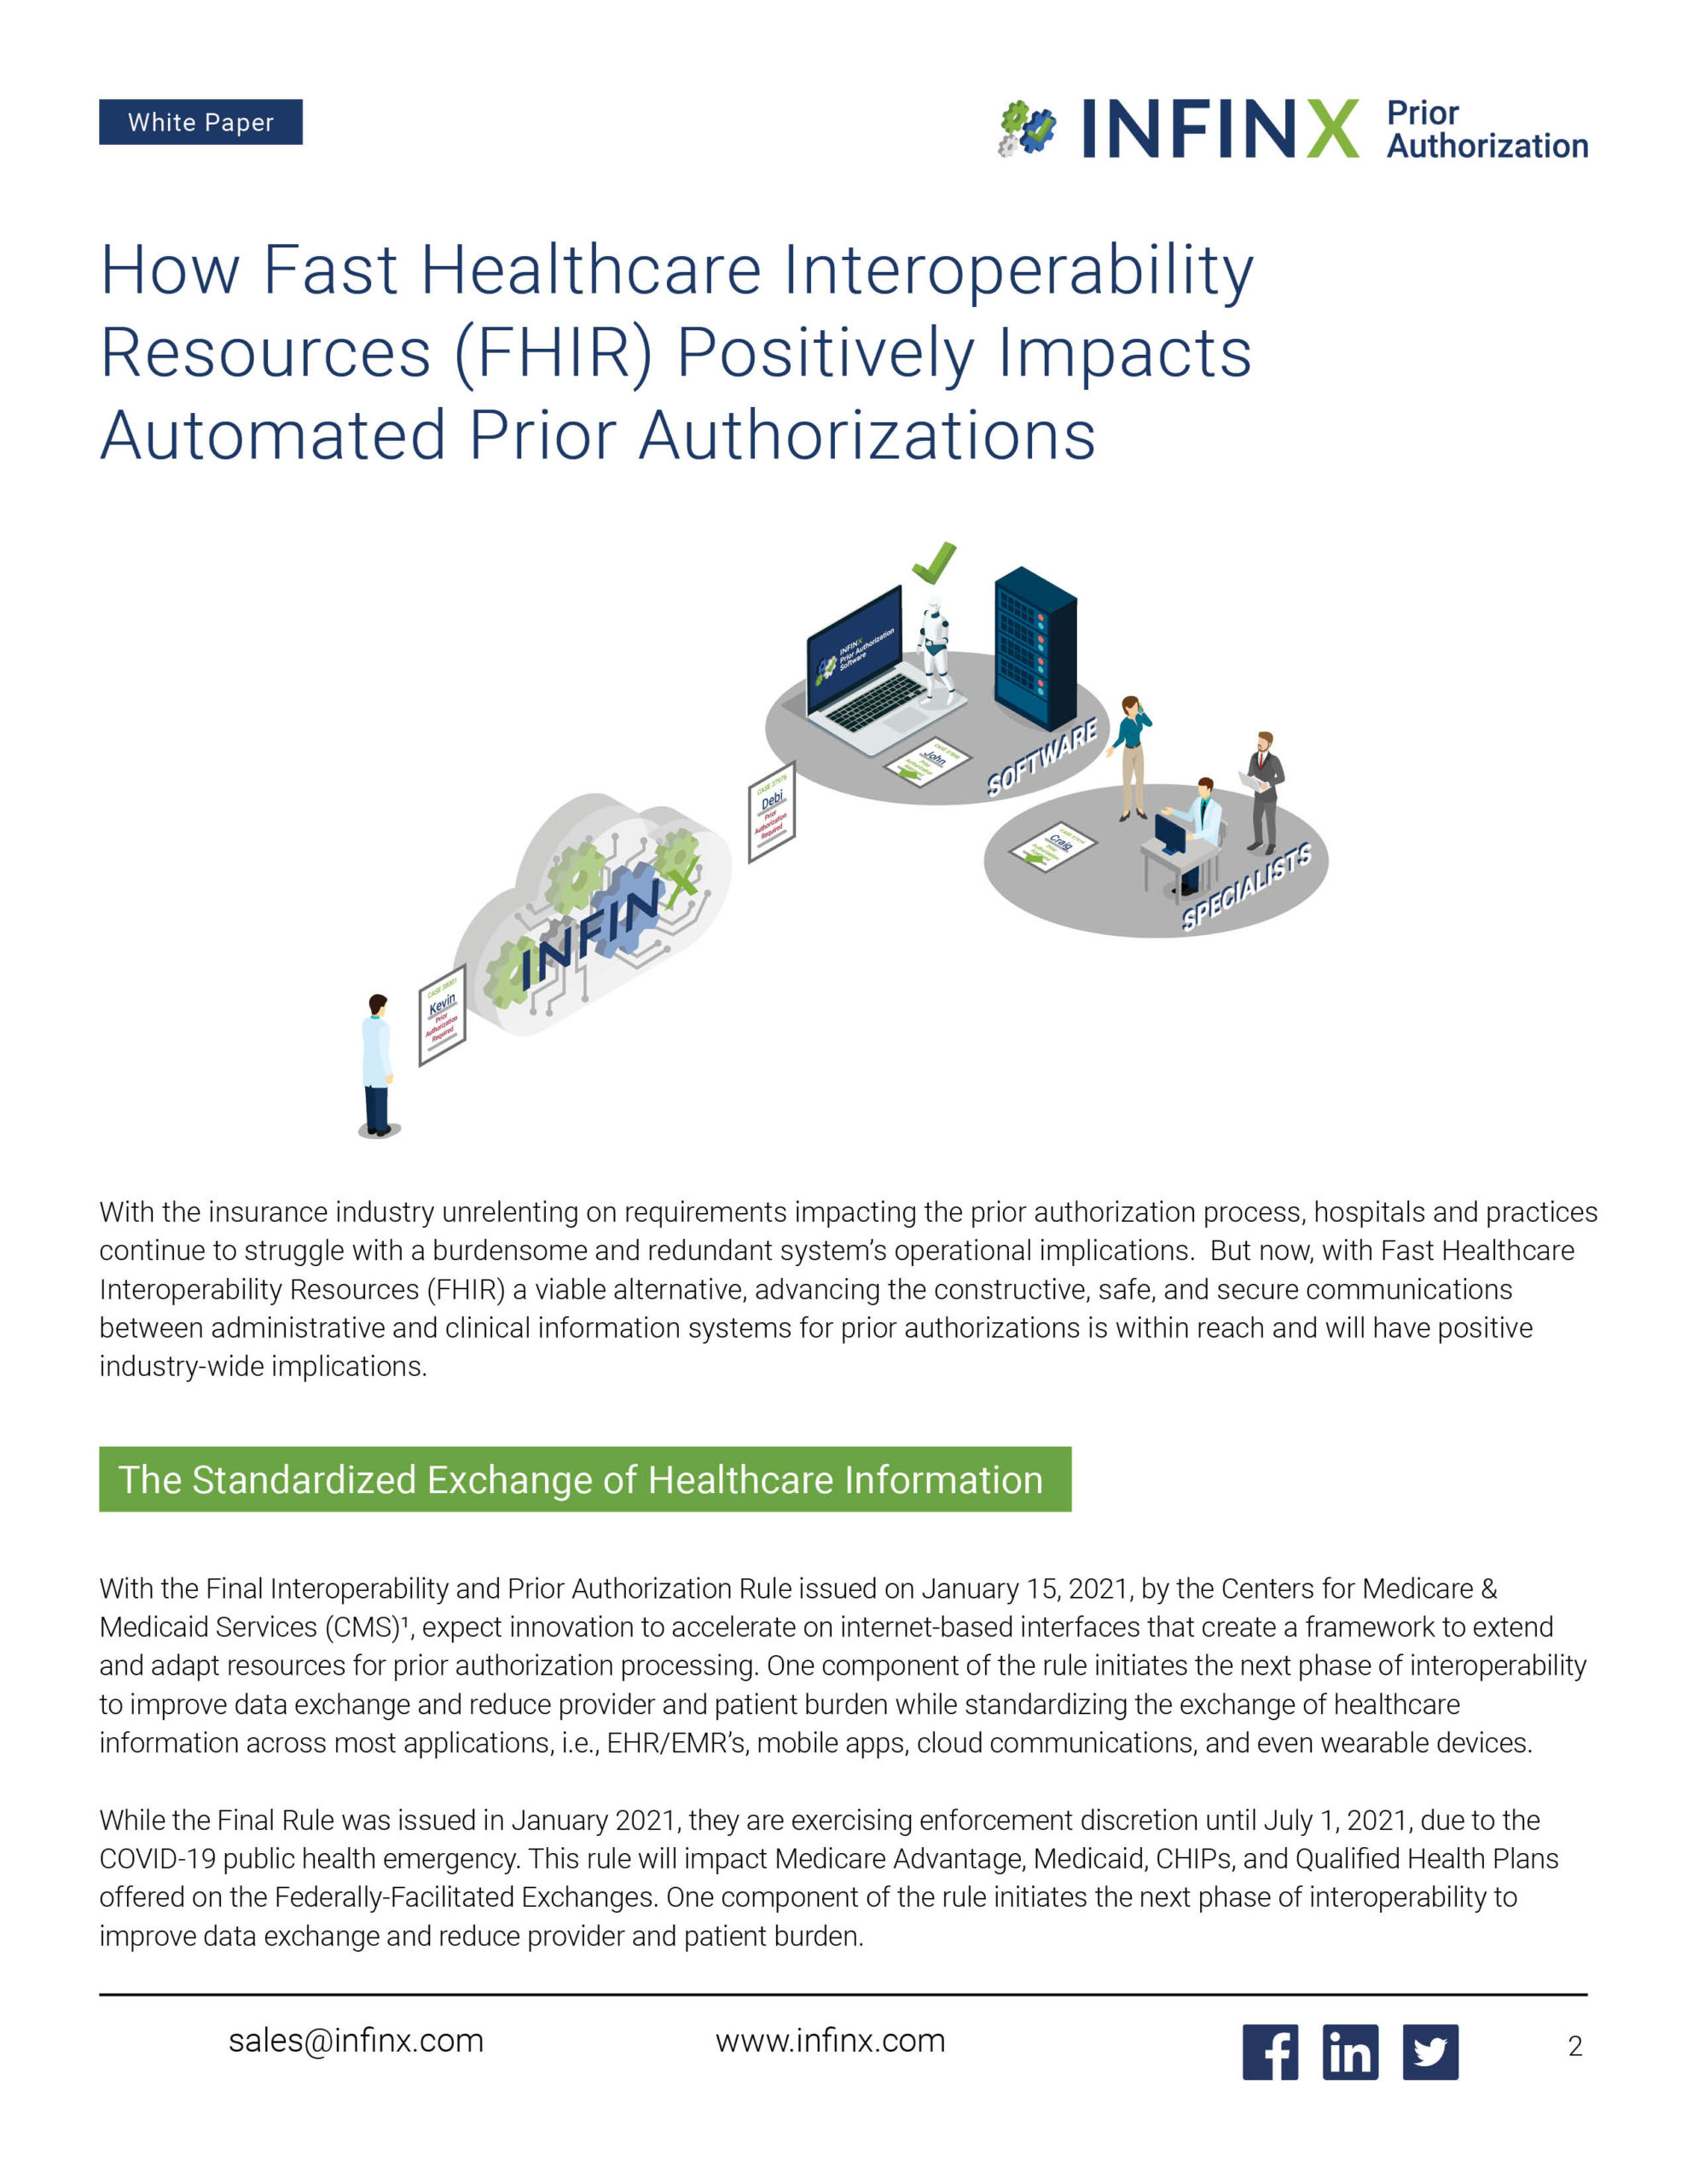 Infinx - White Paper - How Fast Healthcare Interoperability Resources (FHIR) Positively Impact Automated Prior Authorizations July202 1 2